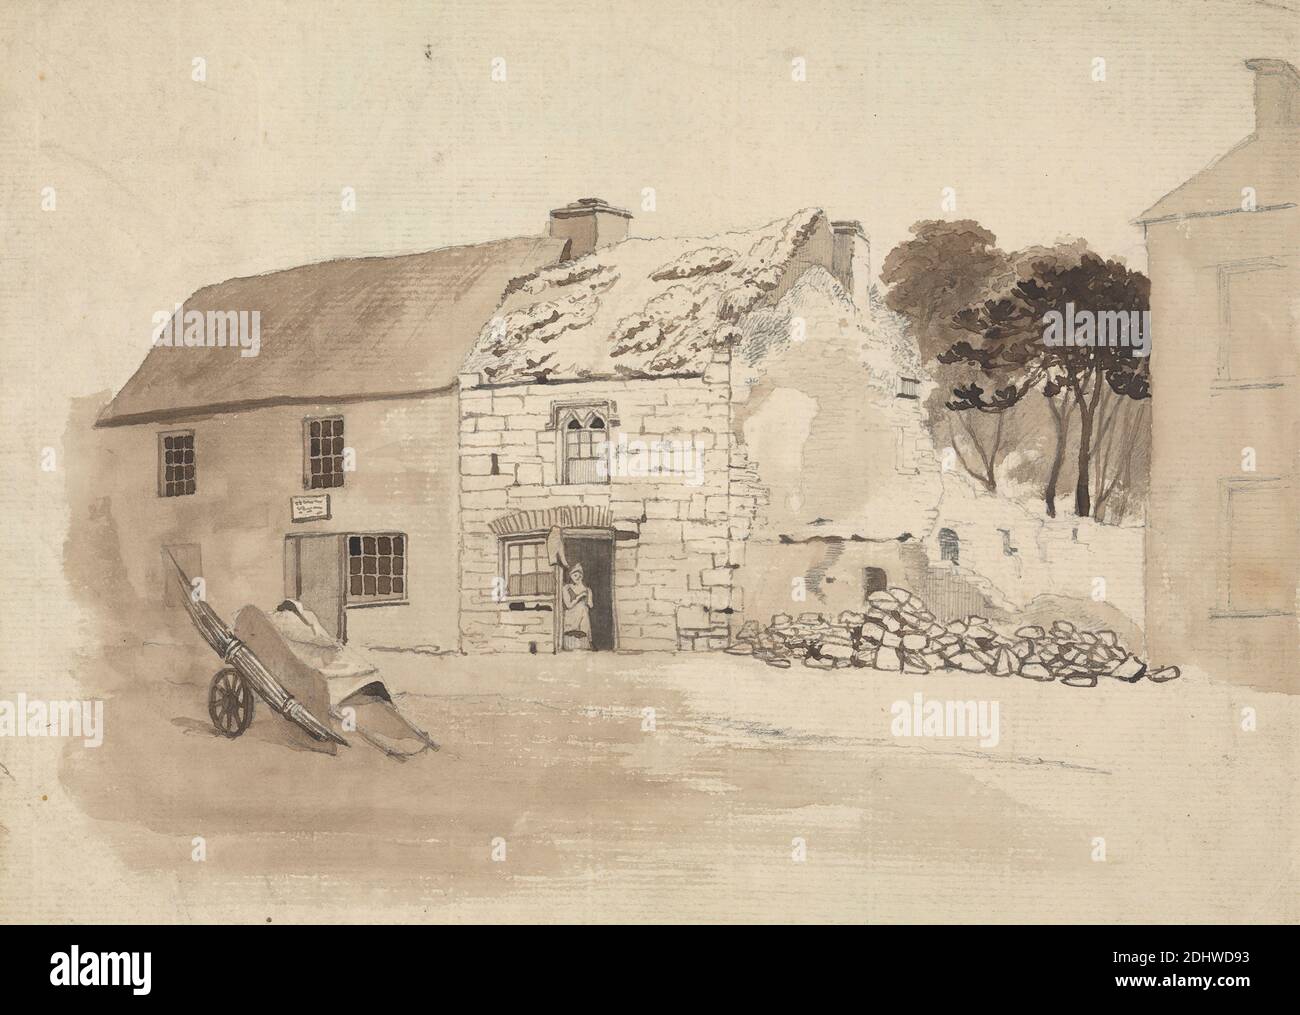 Houses at Kilmallock, Thomas Crofton Croker, 1798–1854, British, undated, Pen and black ink, brown ink, brown wash, and graphite on medium, moderately textured, beige laid paper, Sheet: 6 3/4 × 9 1/8 inches (17.1 × 23.2 cm), architectural subject, figure, houses, rubble, trees, Europe, Kilmallock, Limerick Stock Photo